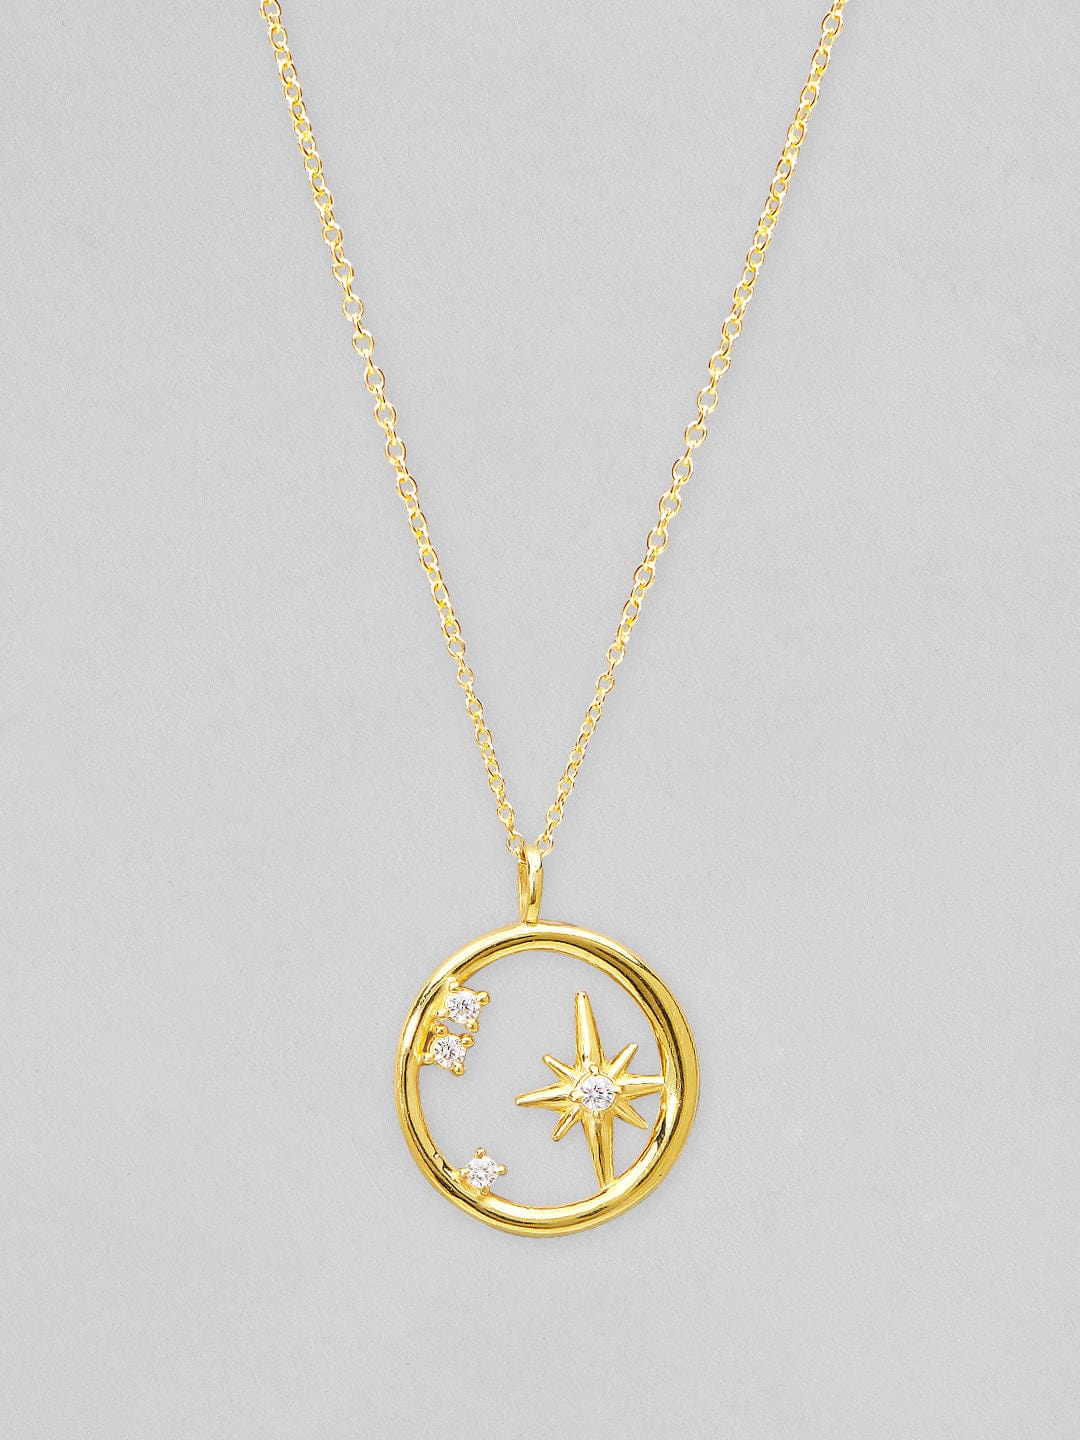 Rubans 925 Silver The Earth And Sun Pendant Necklace - Gold Plated Chain &amp; Necklaces